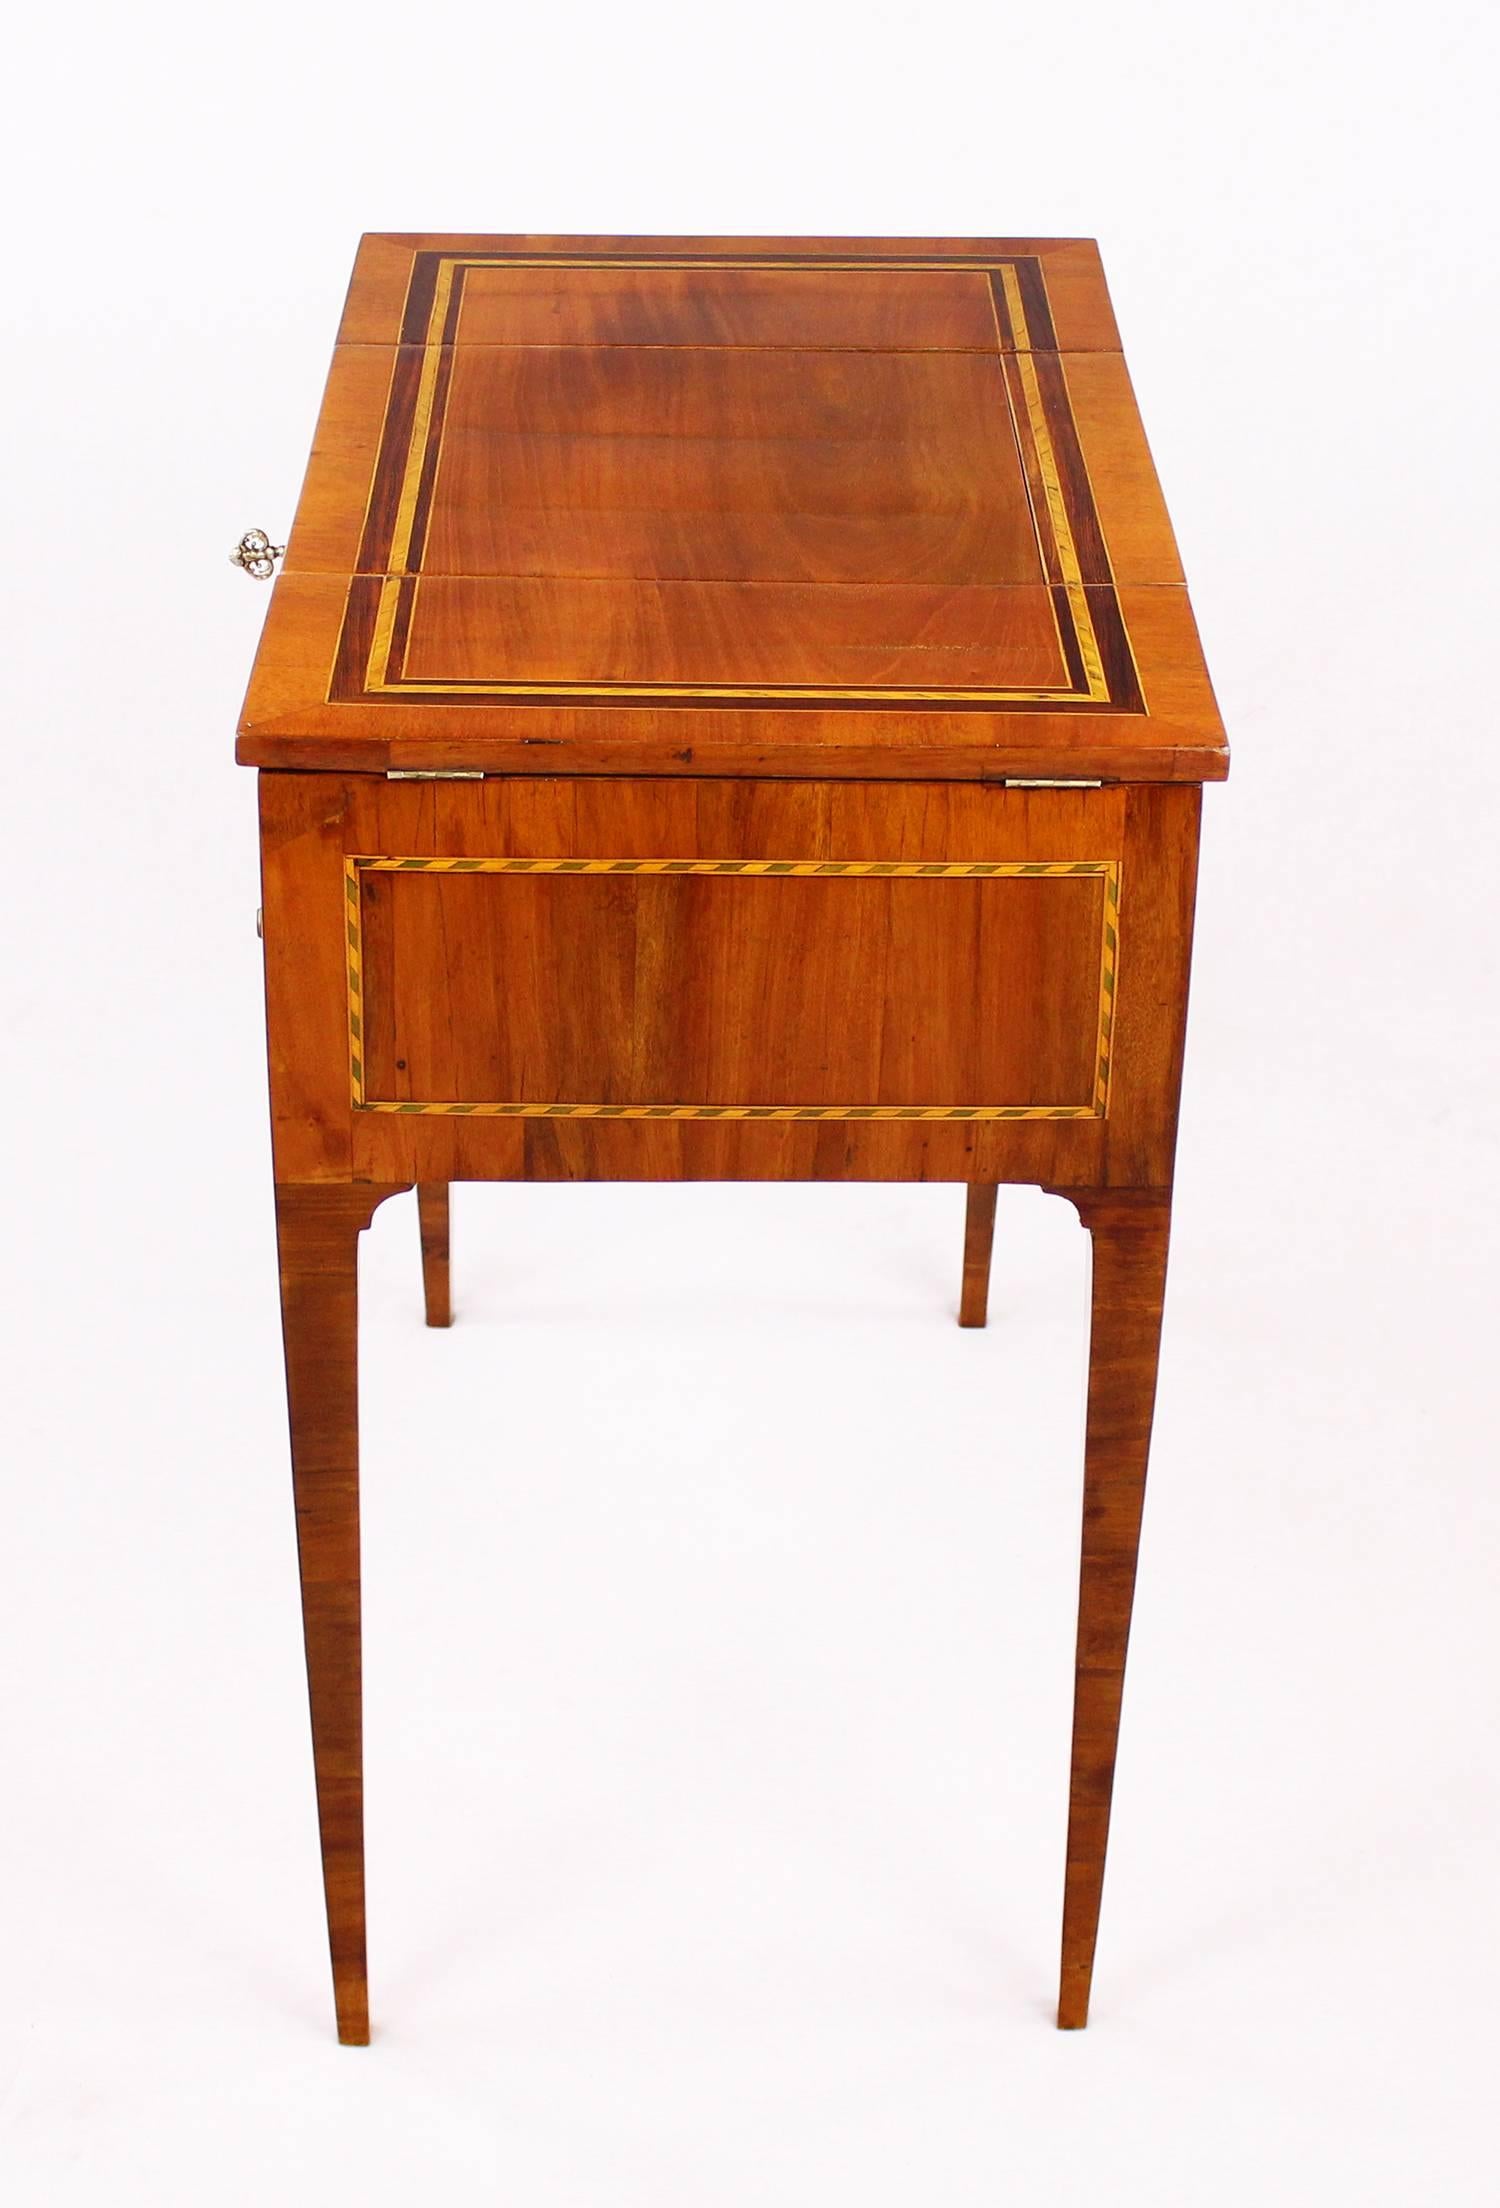 Early 19th Century Dressing Table, Poudreuse, Mahogany Veneered, Marquetry Works 3